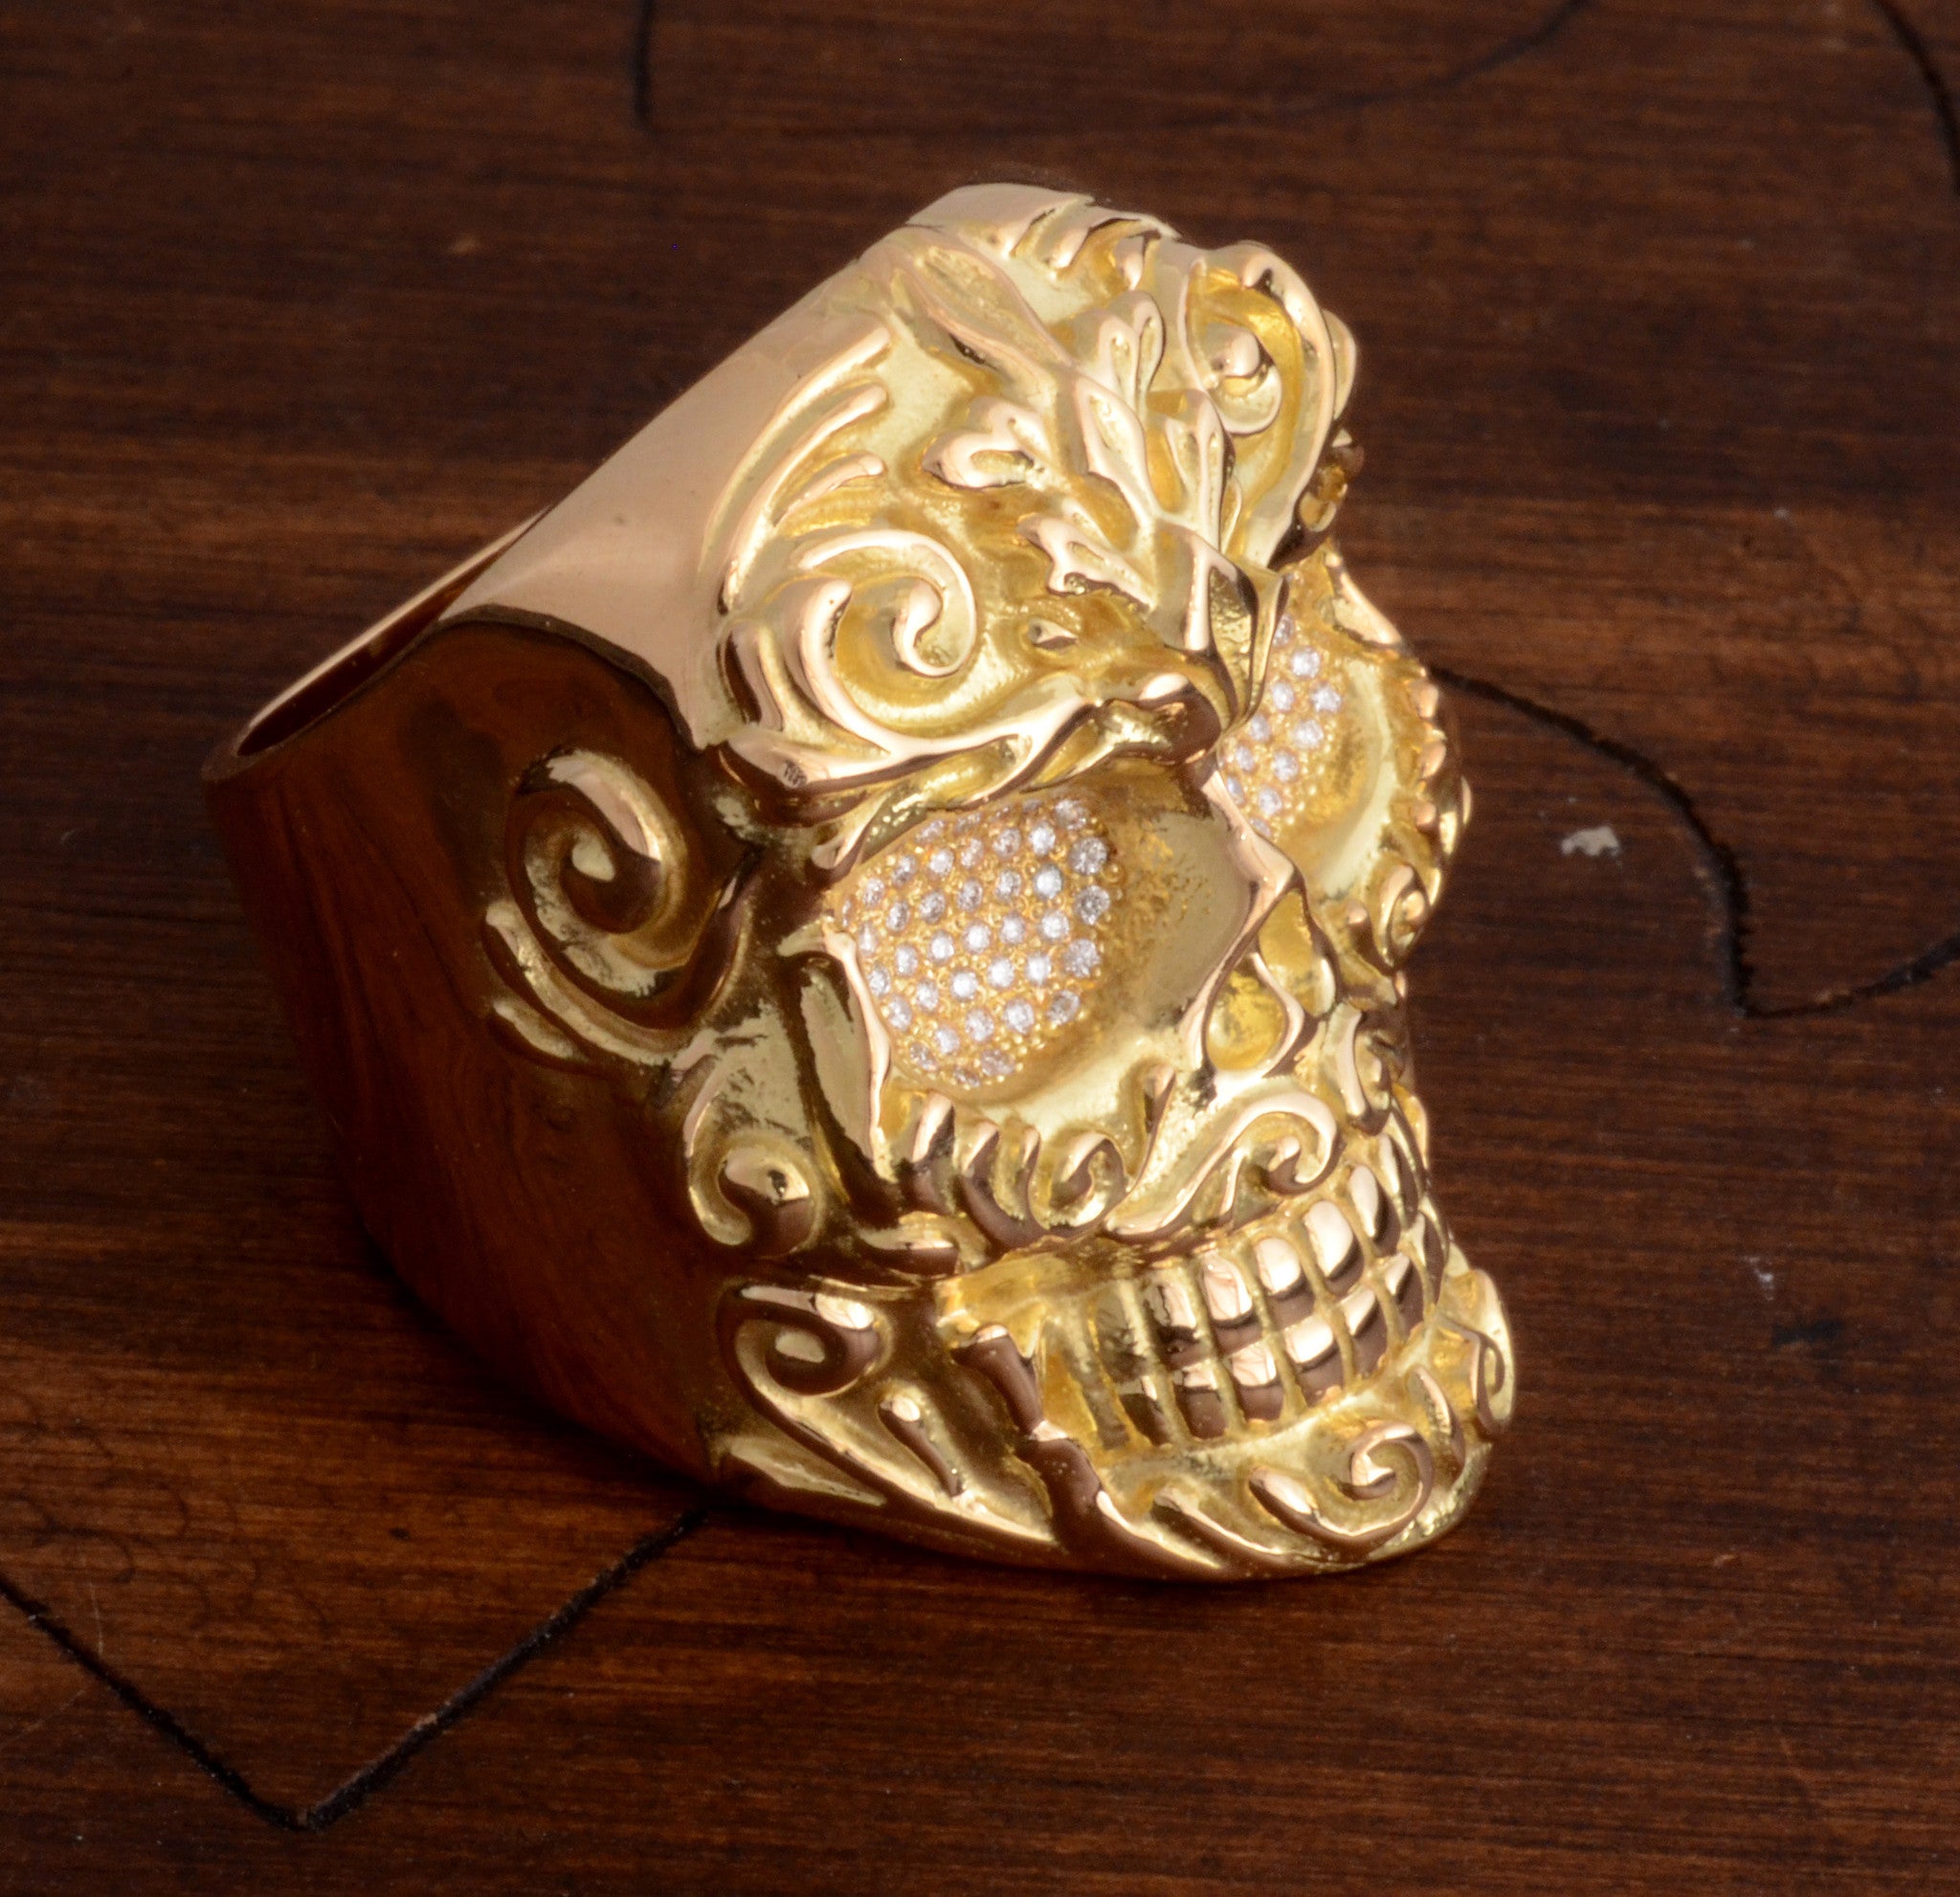 18K Gold Large Floral Scroll Relief Skull